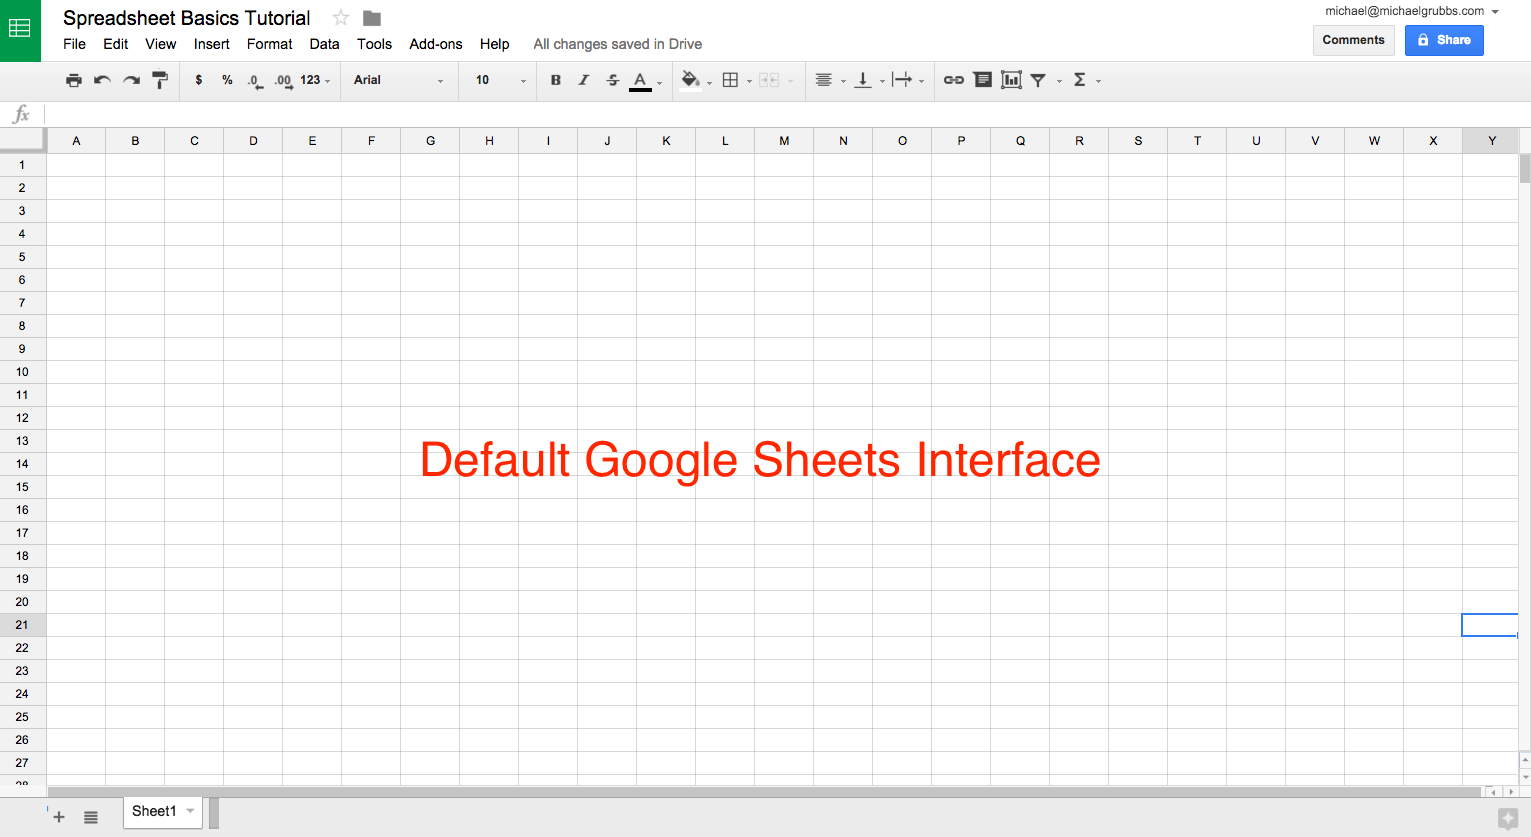 Create Spreadsheet Online Free intended for Google Sheets 101: The Beginner's Guide To ...1531 x 837